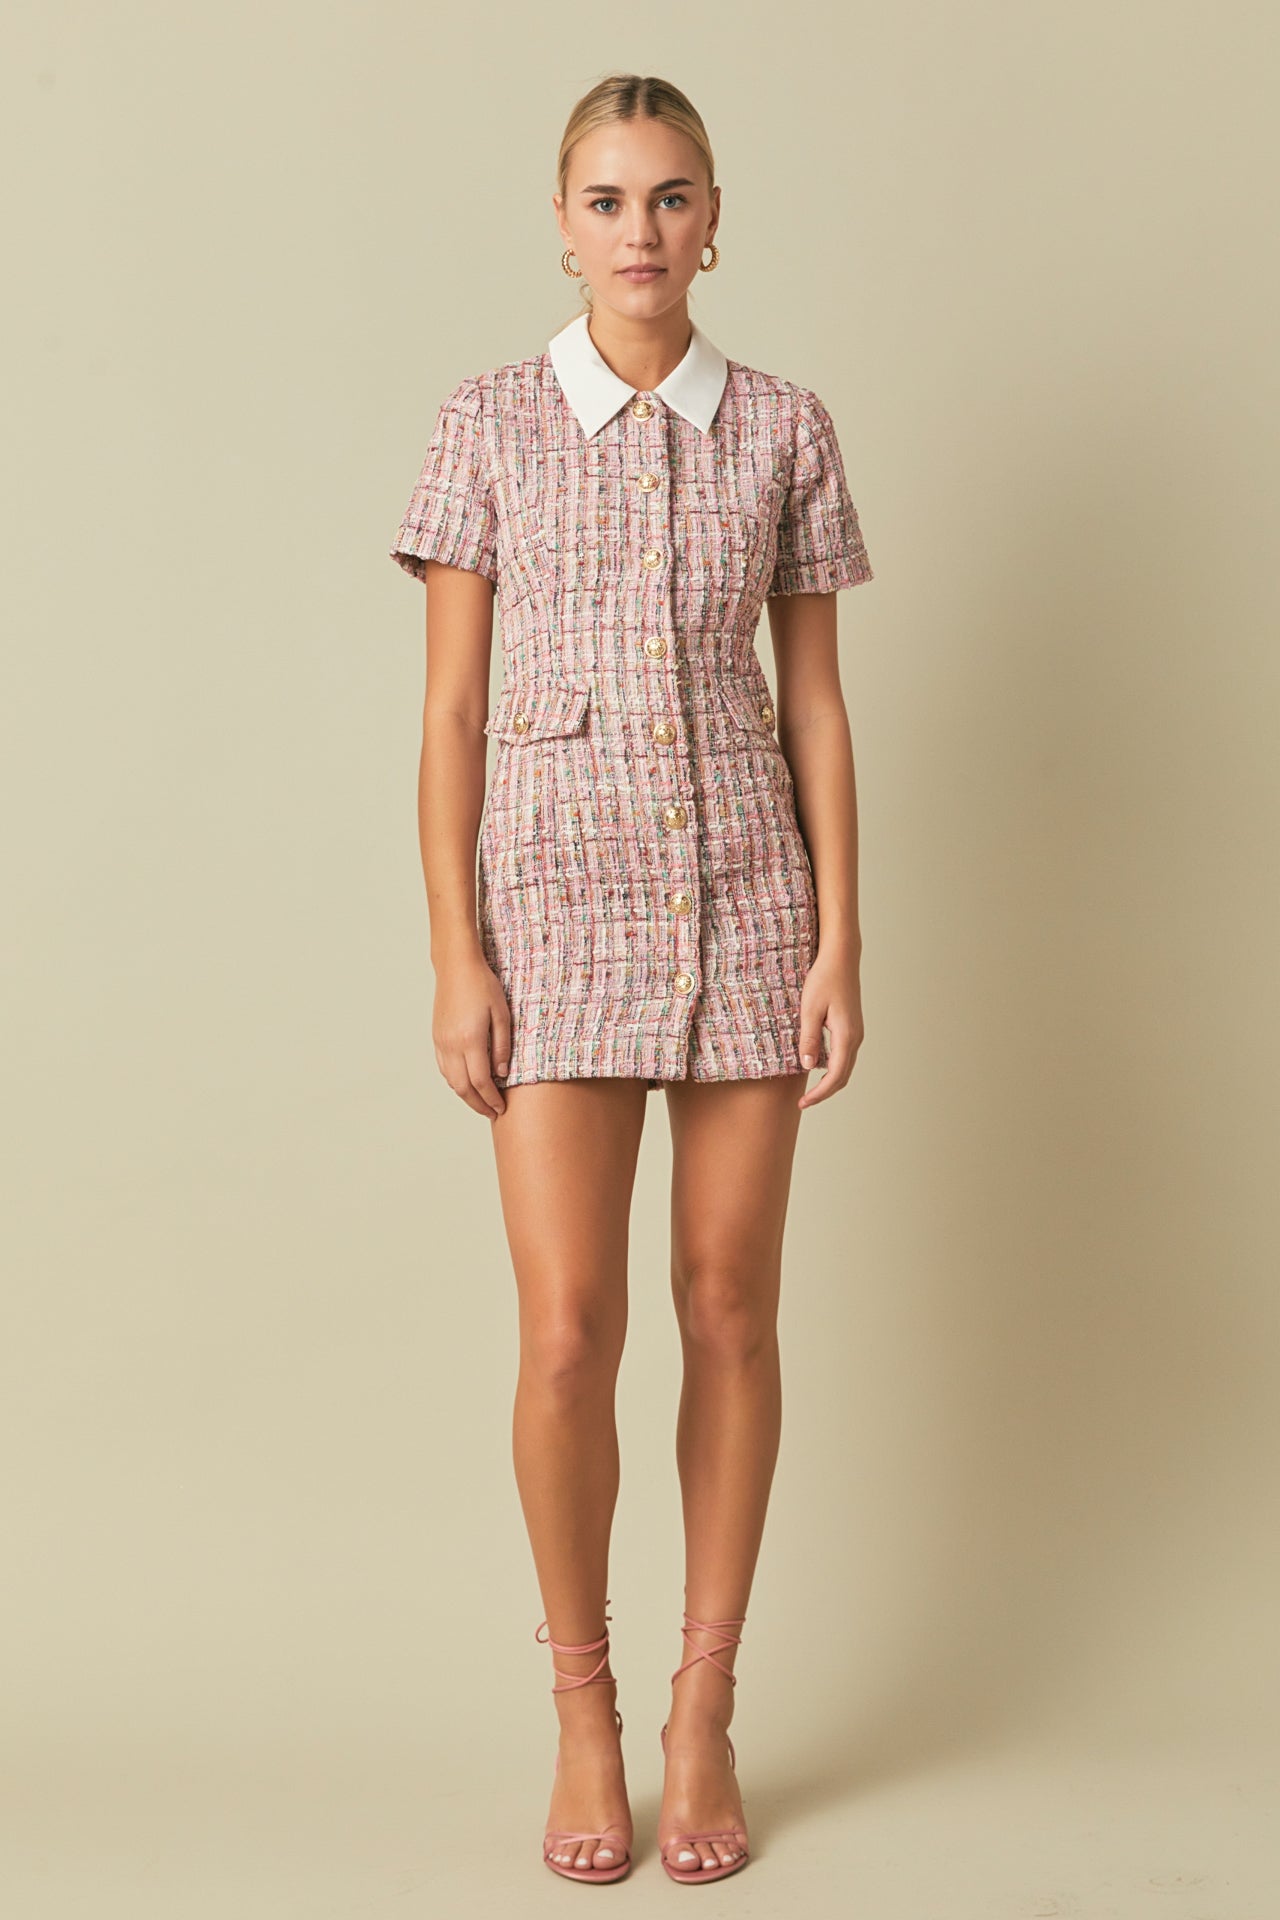 Endless Rose - Multi Tweed Collared Short Sleeve Dress - Dresses in Women's Clothing available at endlessrose.com